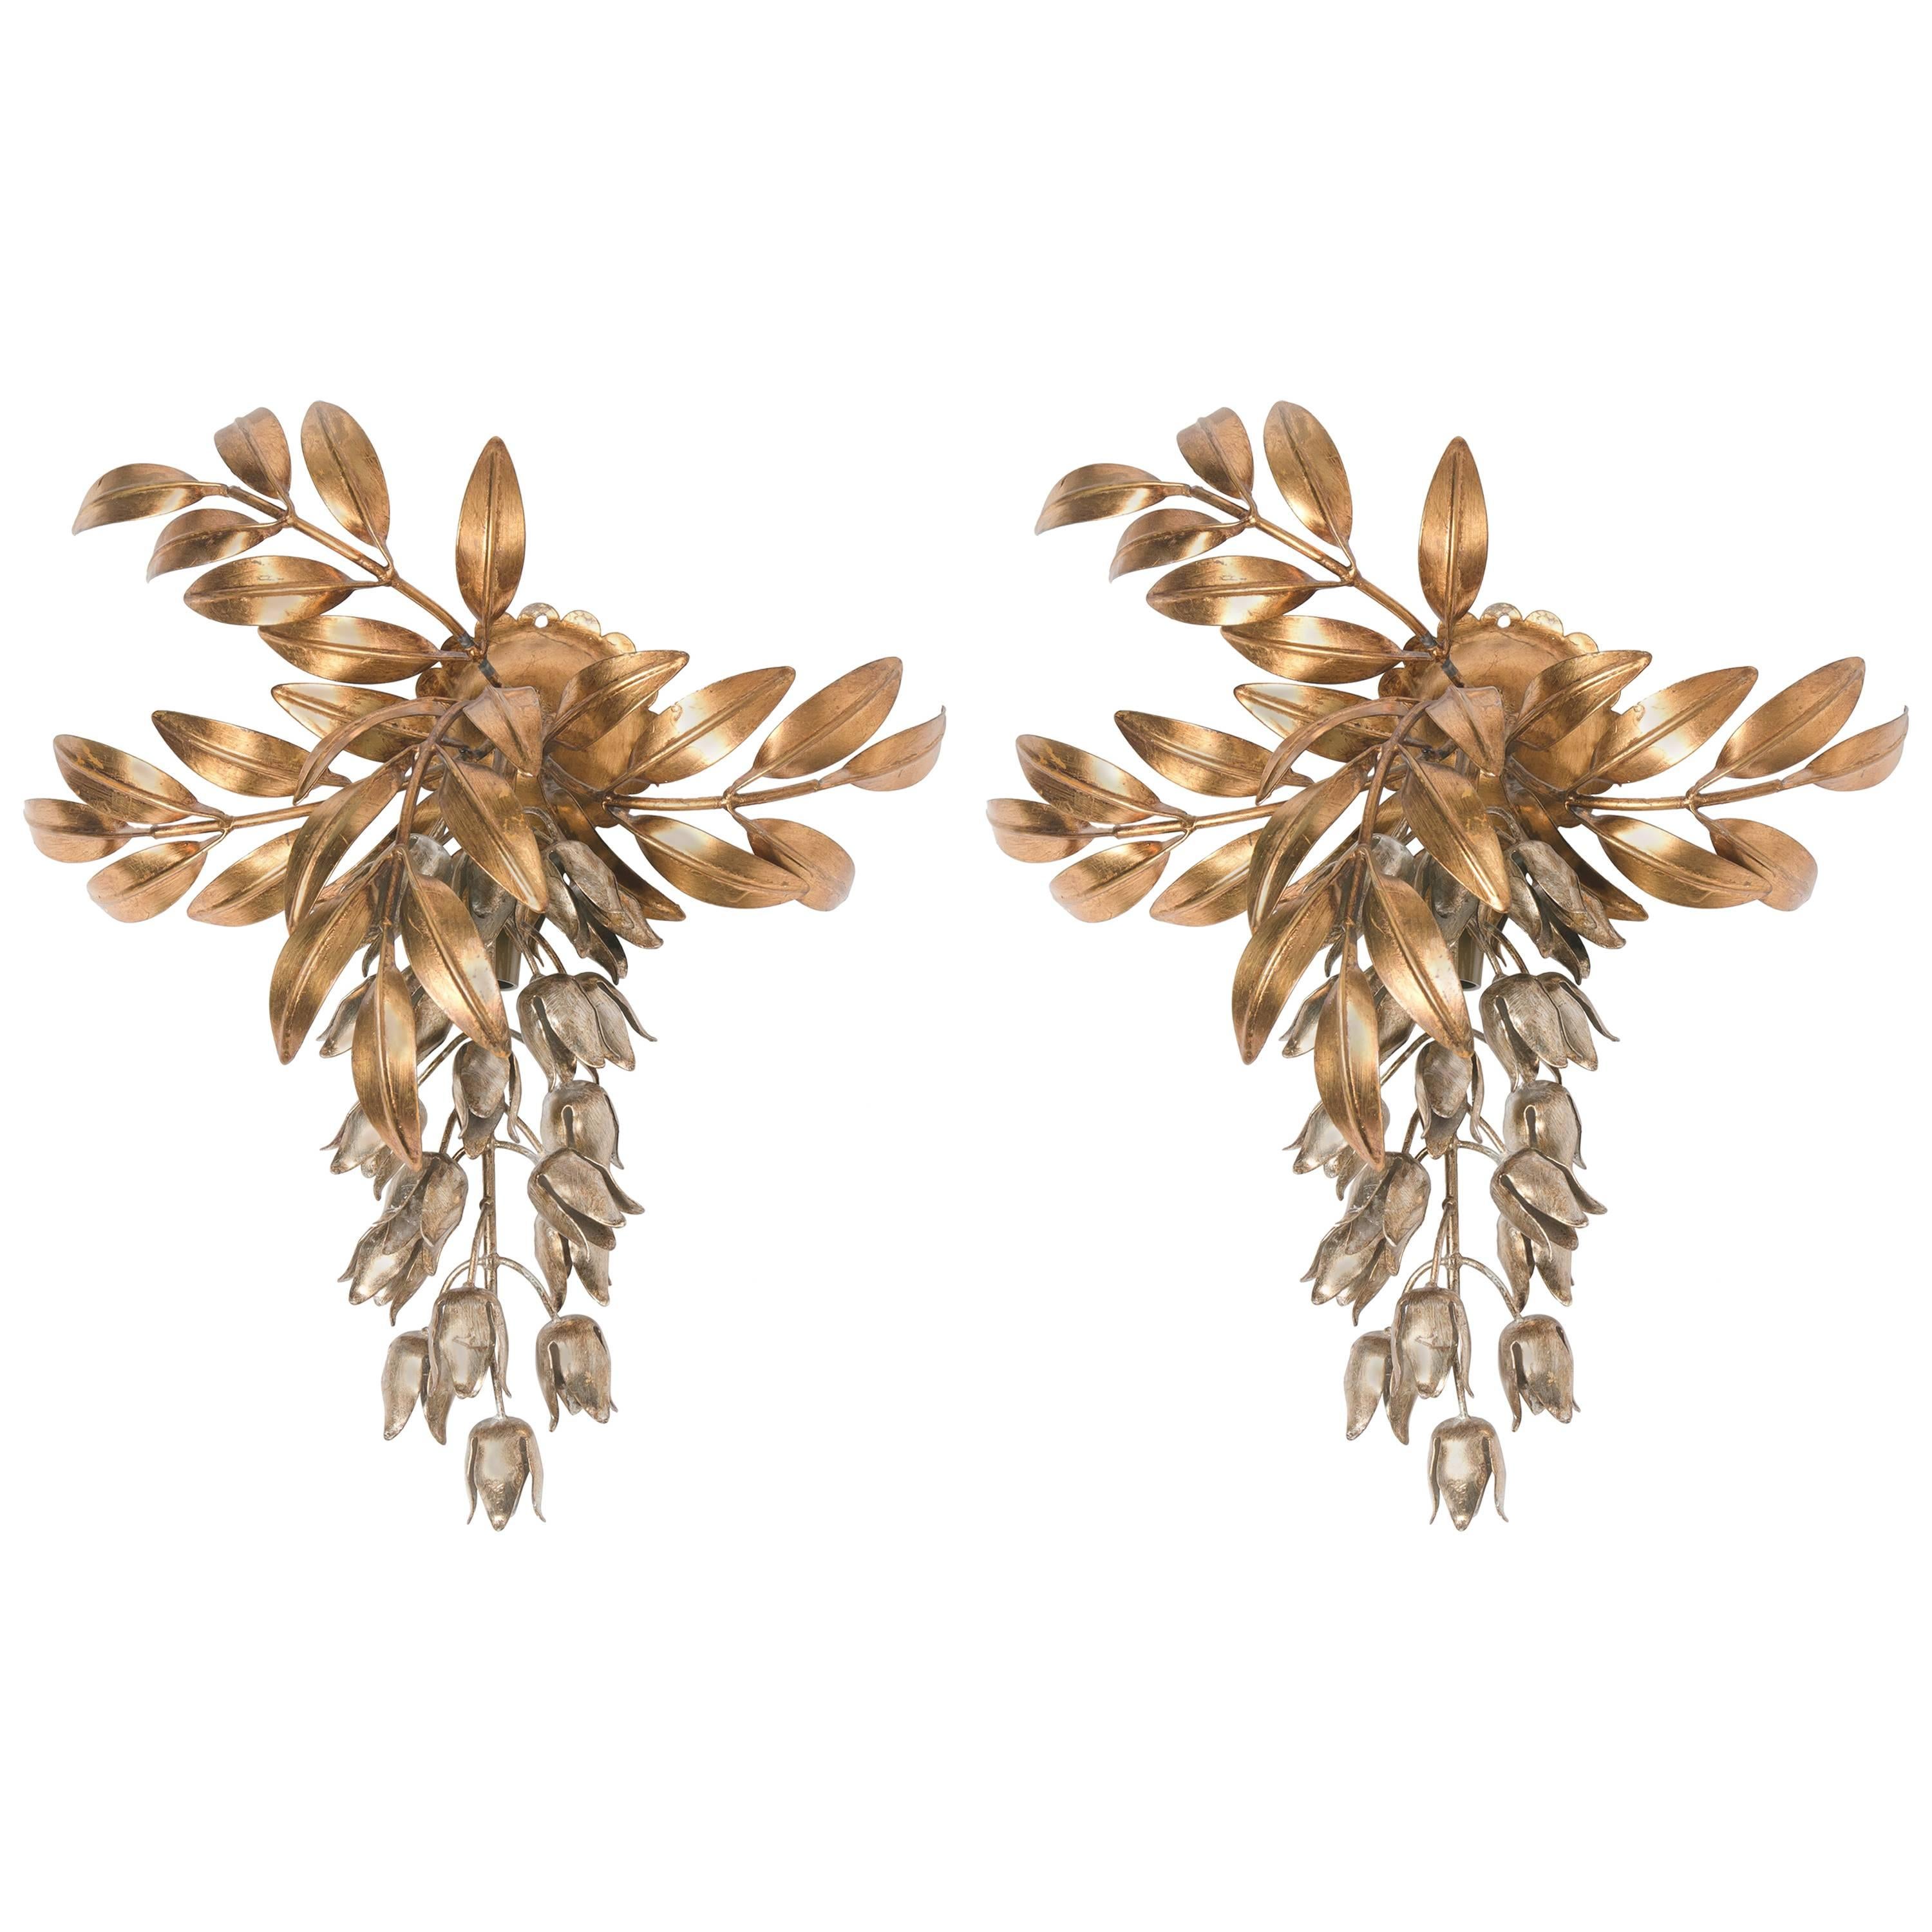 Pair of Hans Kögl Gilt Metal Palm Tree Wall Sconces, 1960s in Maison Jansen Styl